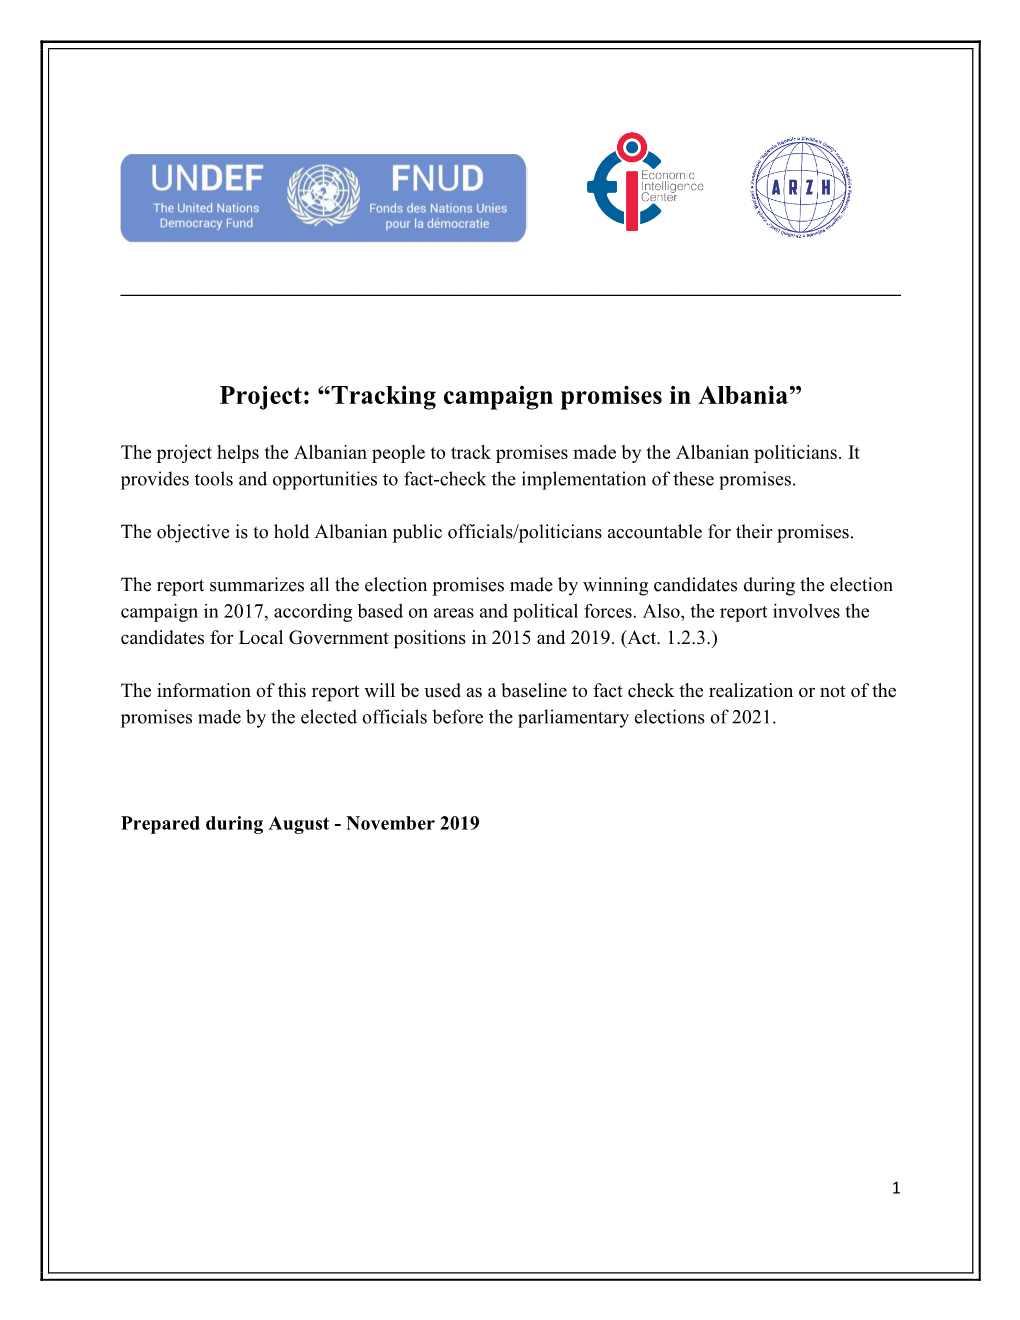 Project: “Tracking Campaign Promises in Albania”